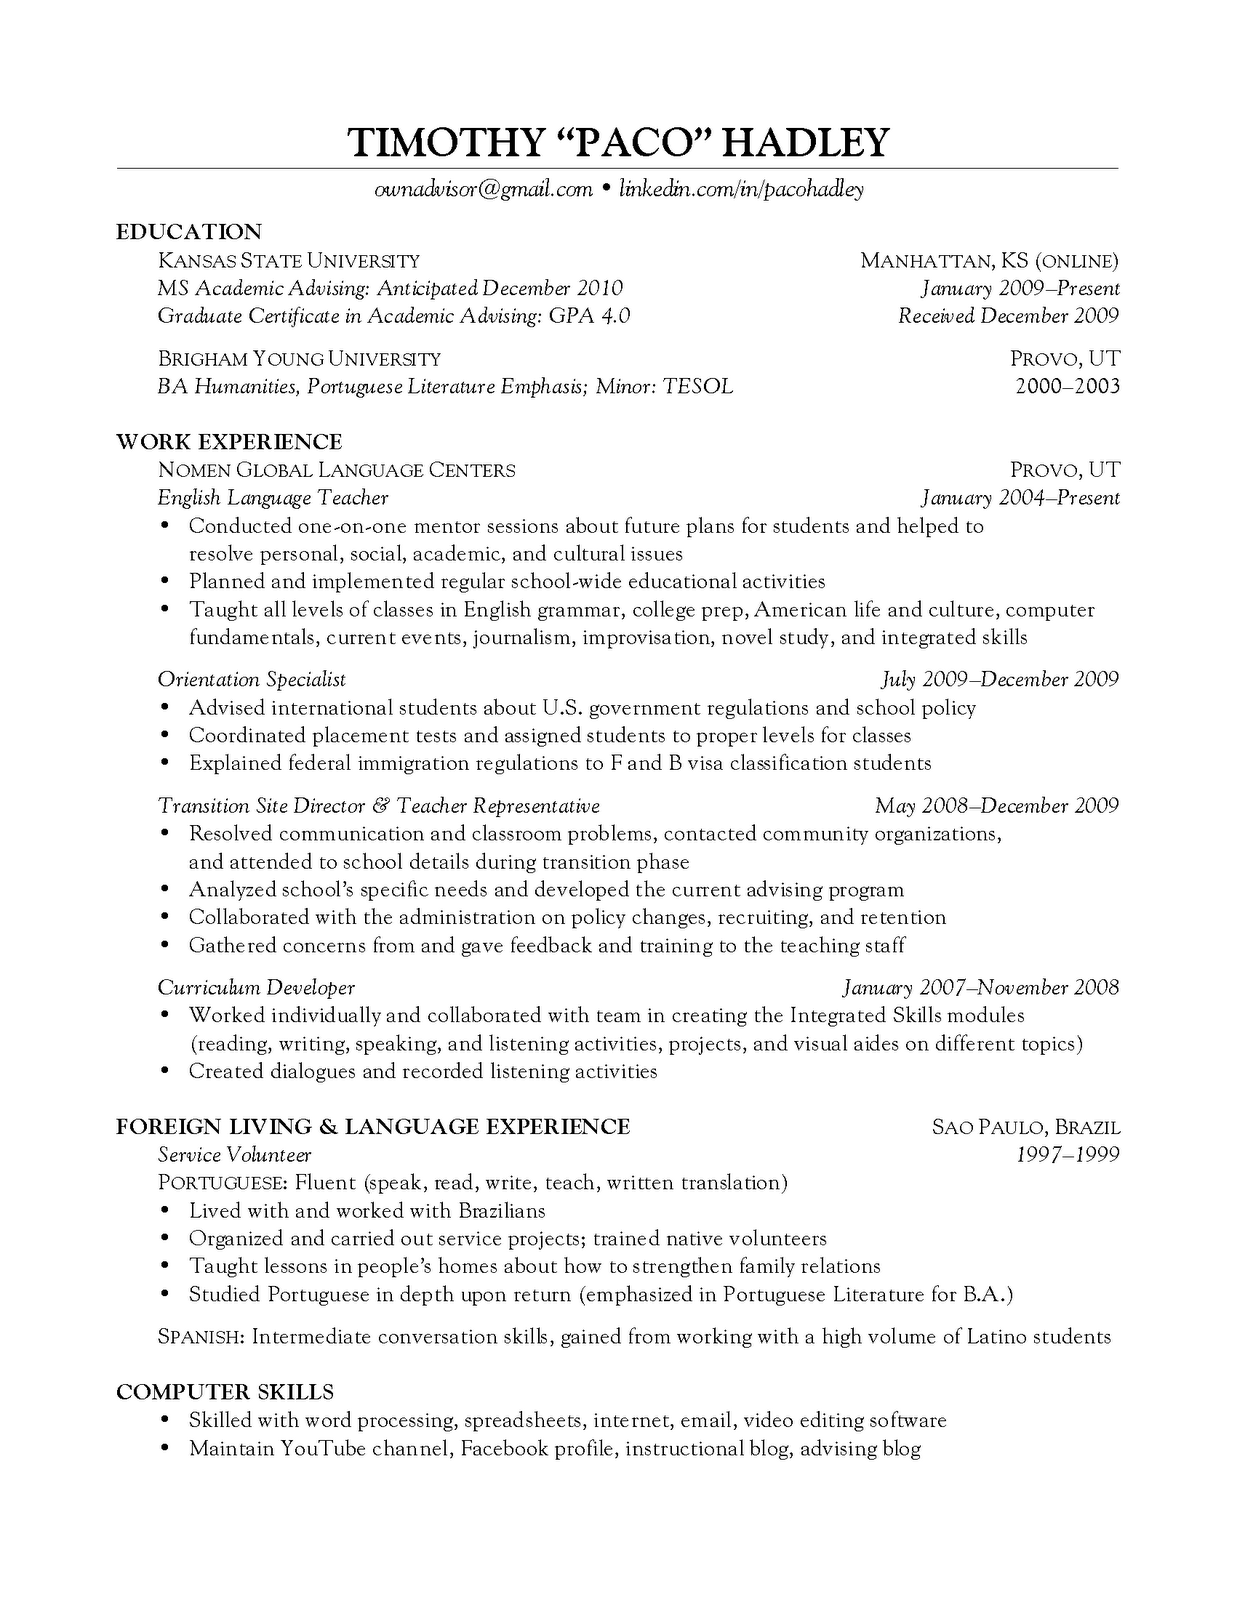 What should i write under profile on my resume